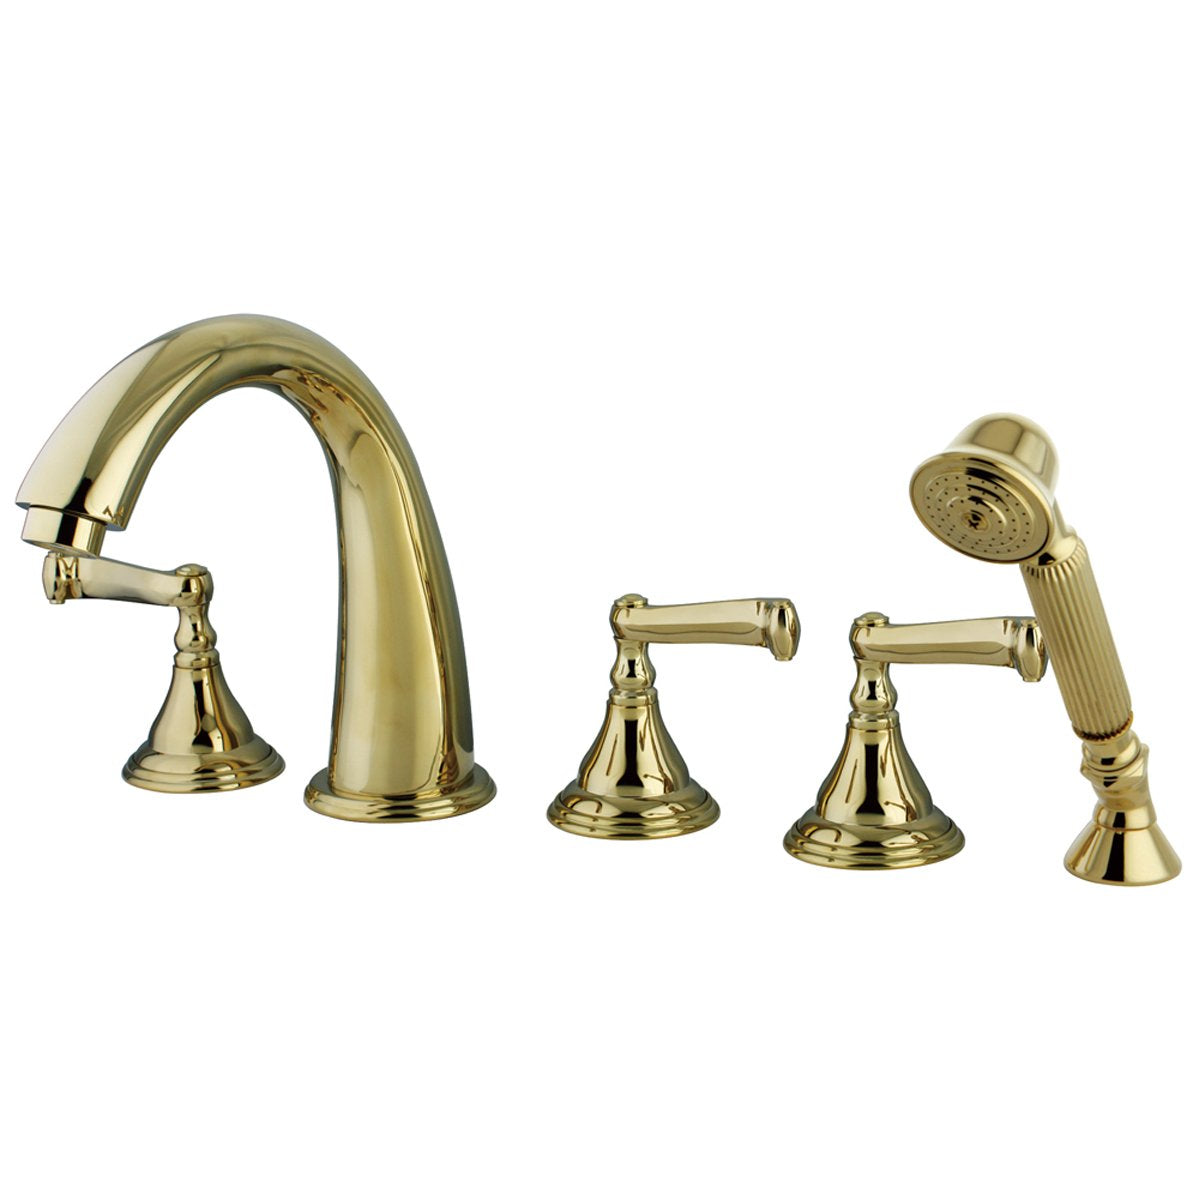 Kingston Brass Royale Roman Tub Filler with Hand Shower in Polished Brass-Tub Faucets-Free Shipping-Directsinks.